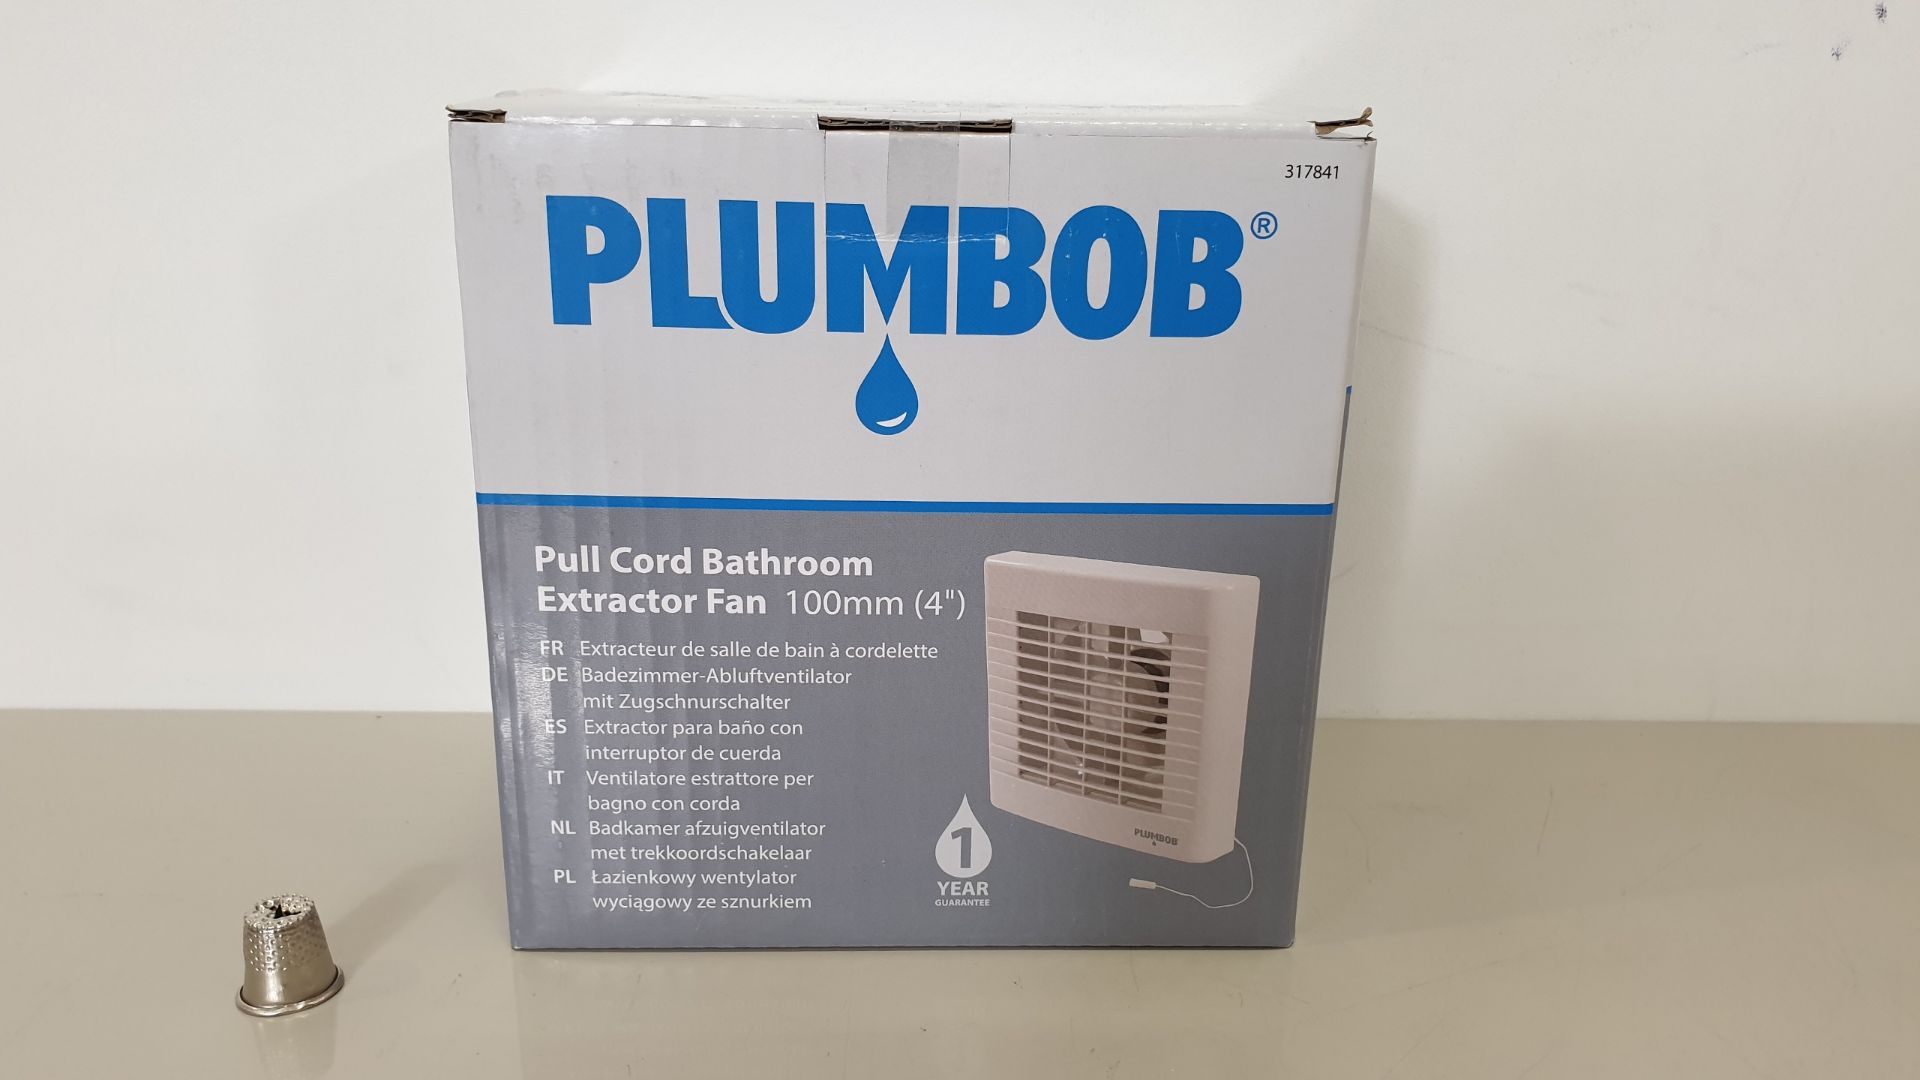 12 X BRAND NEW PLUMBOB PULL CORD BATHROOM EXTRACTOR FANS 100MM (4") WITH LOW 45dBA NOISE LEVEL (PROD